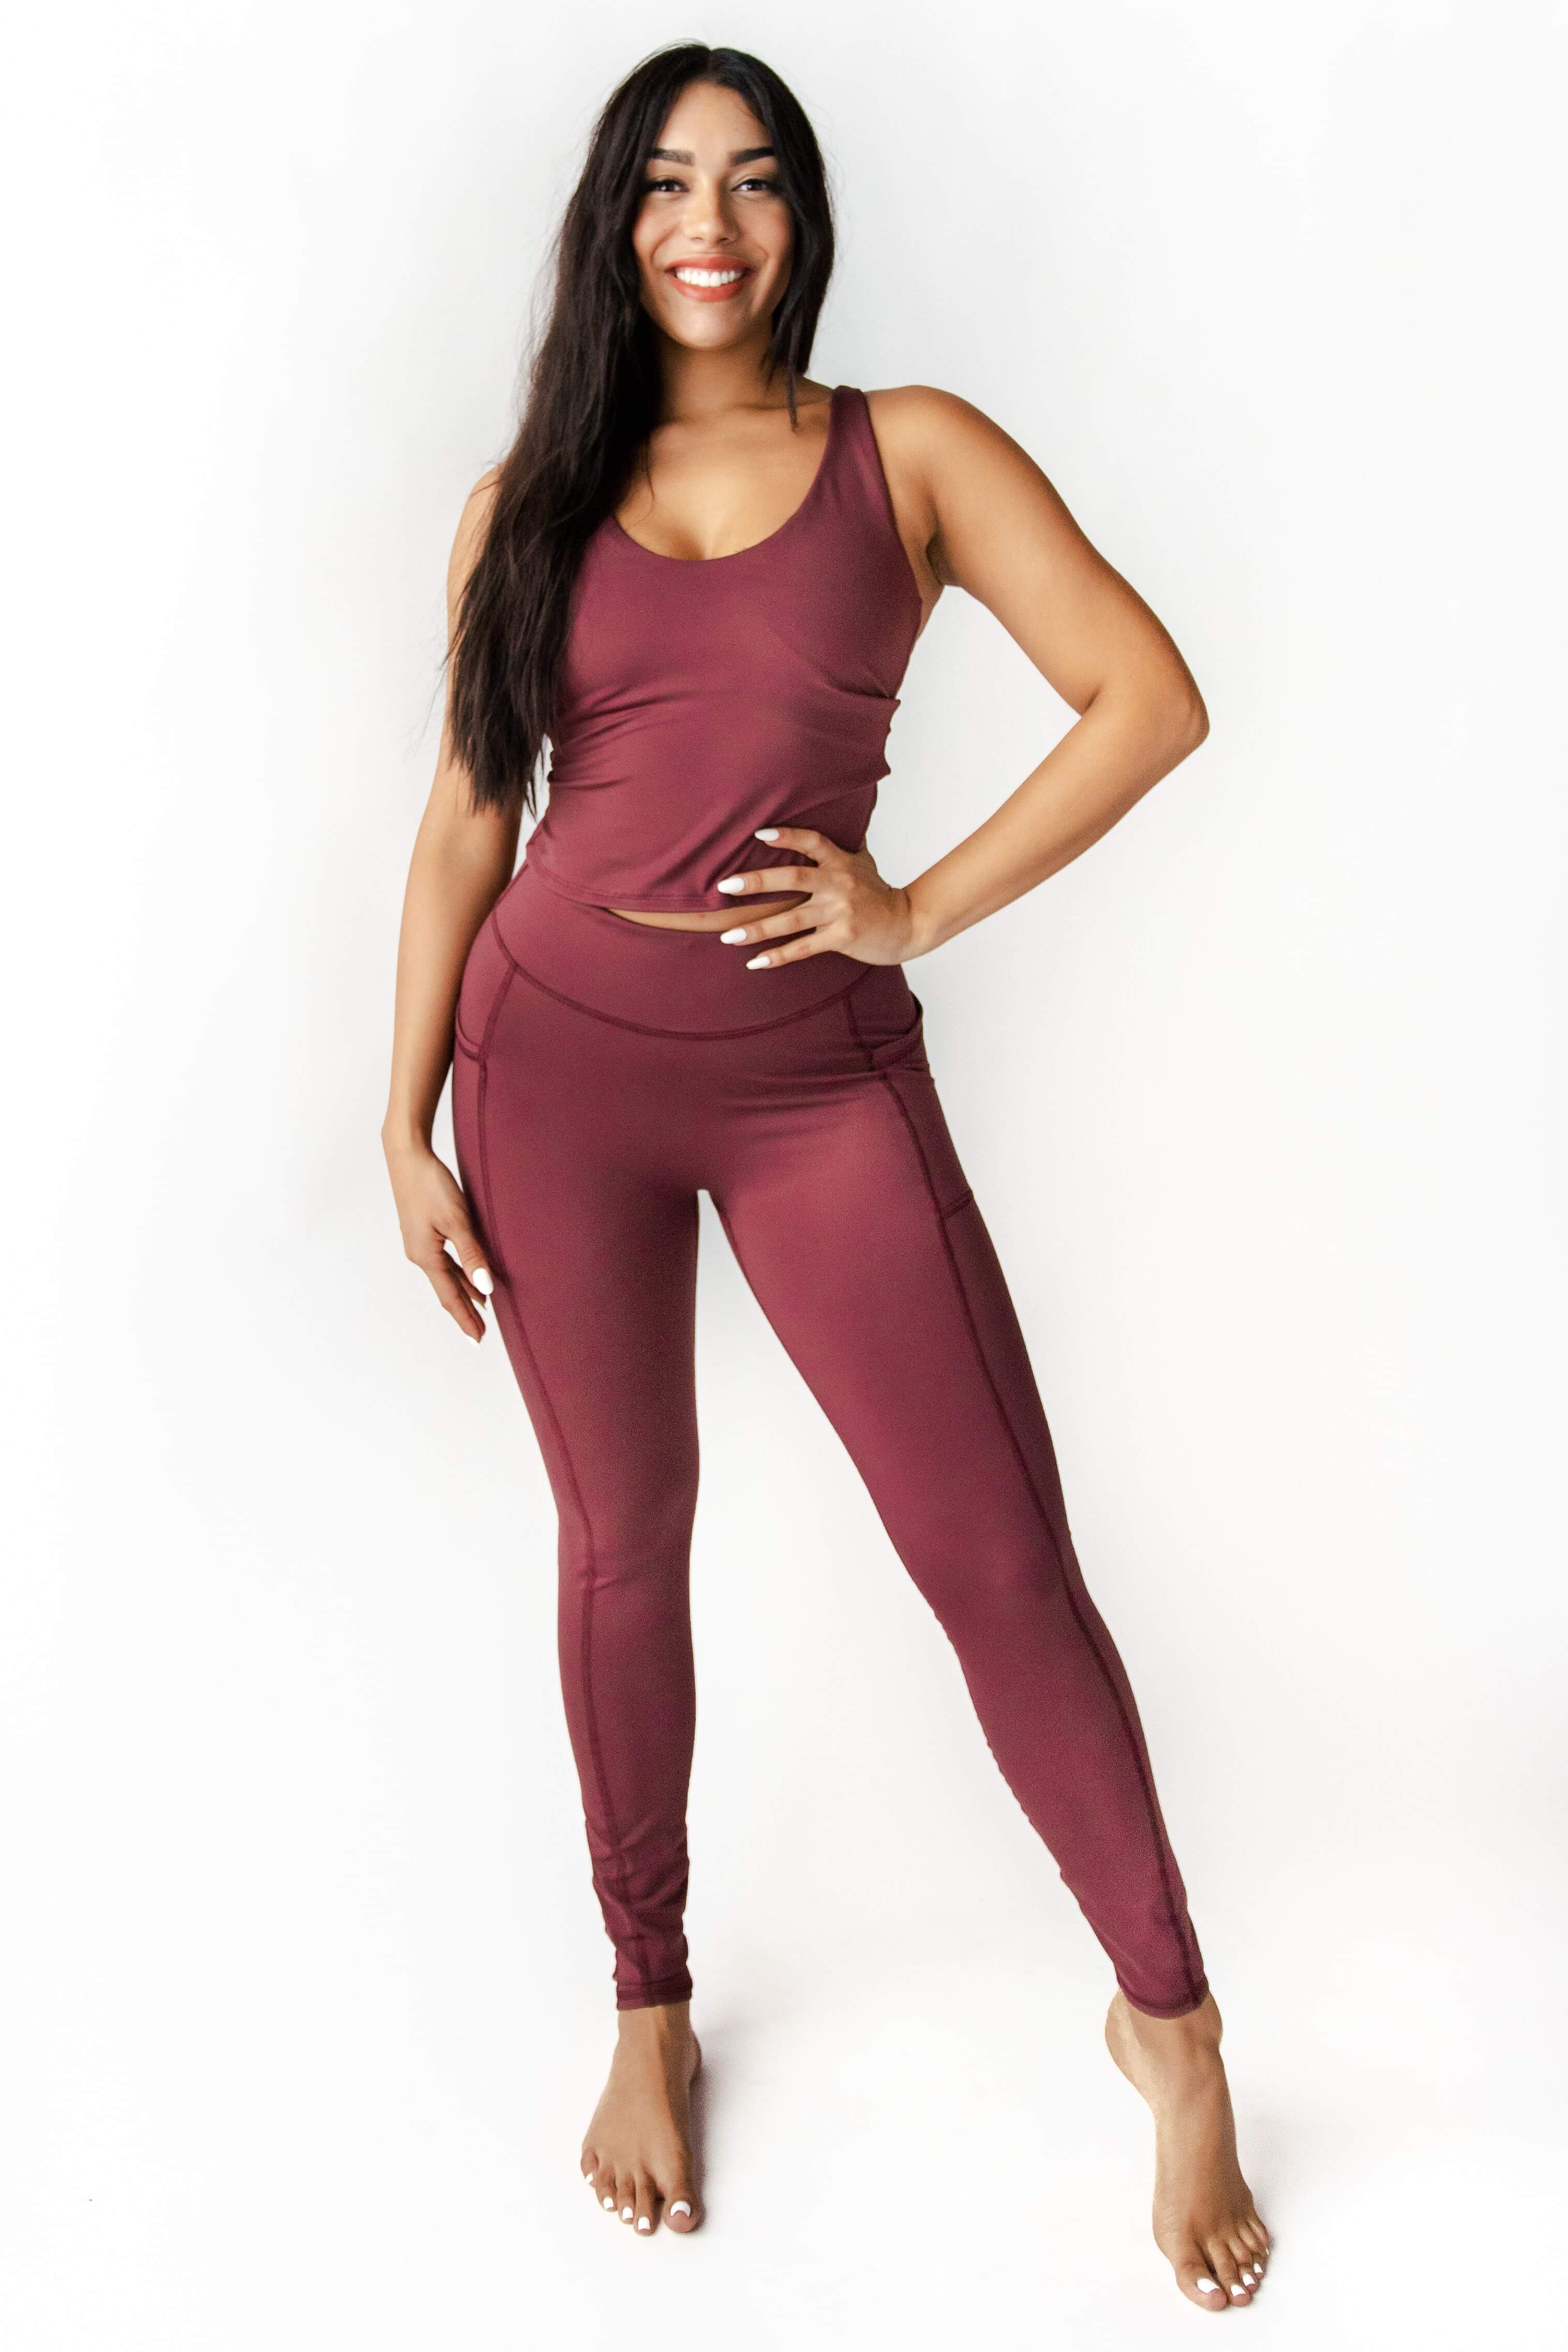 SALE! Maroon Red Cassi Mesh Pockets Workout Leggings Yoga